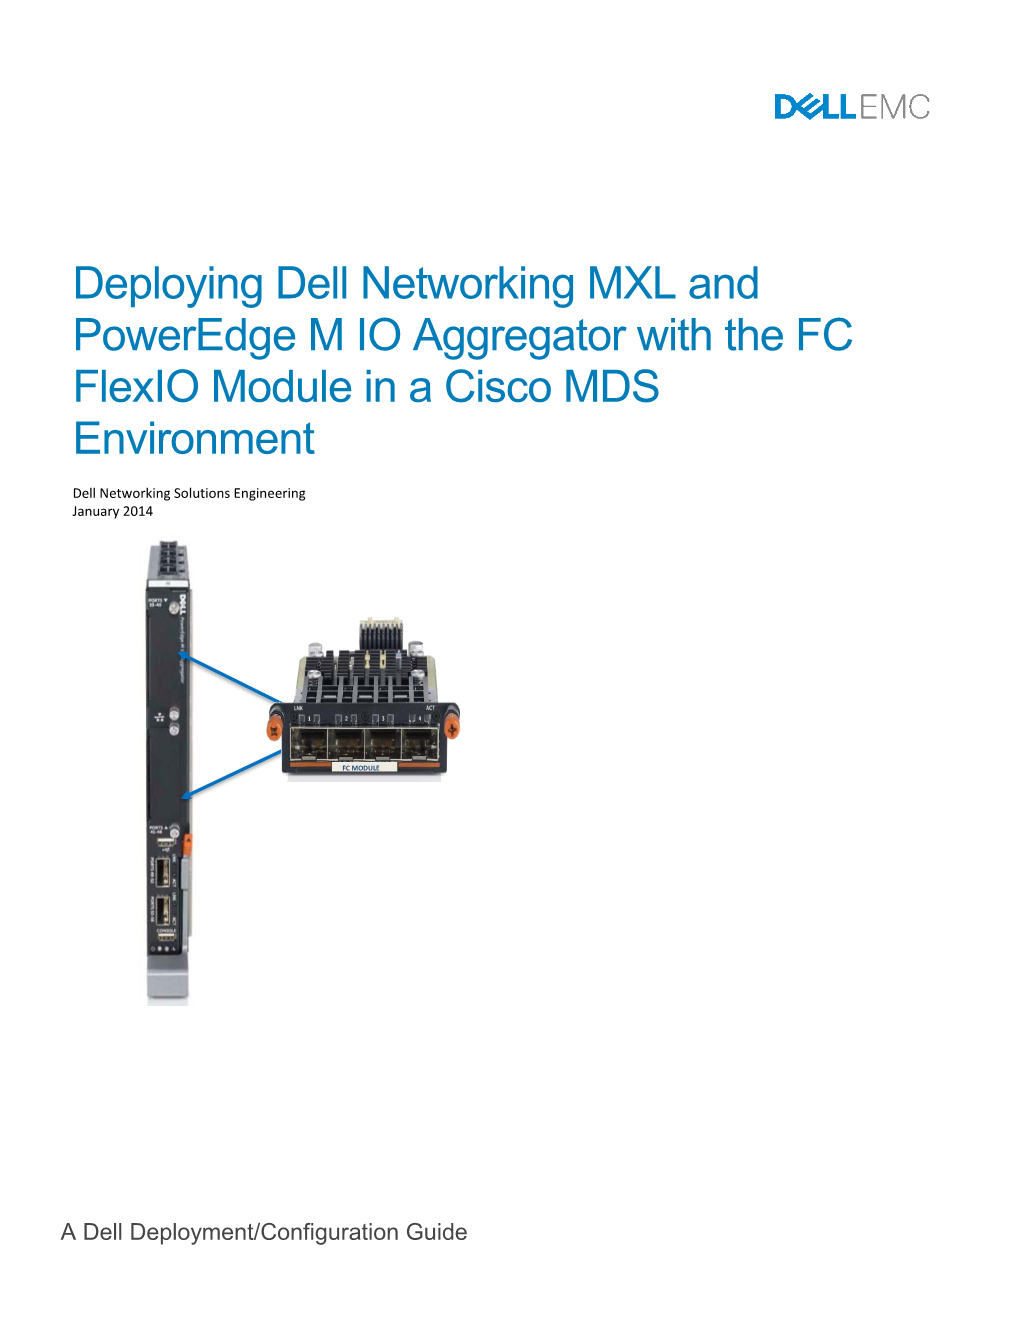 Deploying Dell Networking MXL and Poweredge M IO Aggregator with the FC Flexio Module in a Cisco MDS